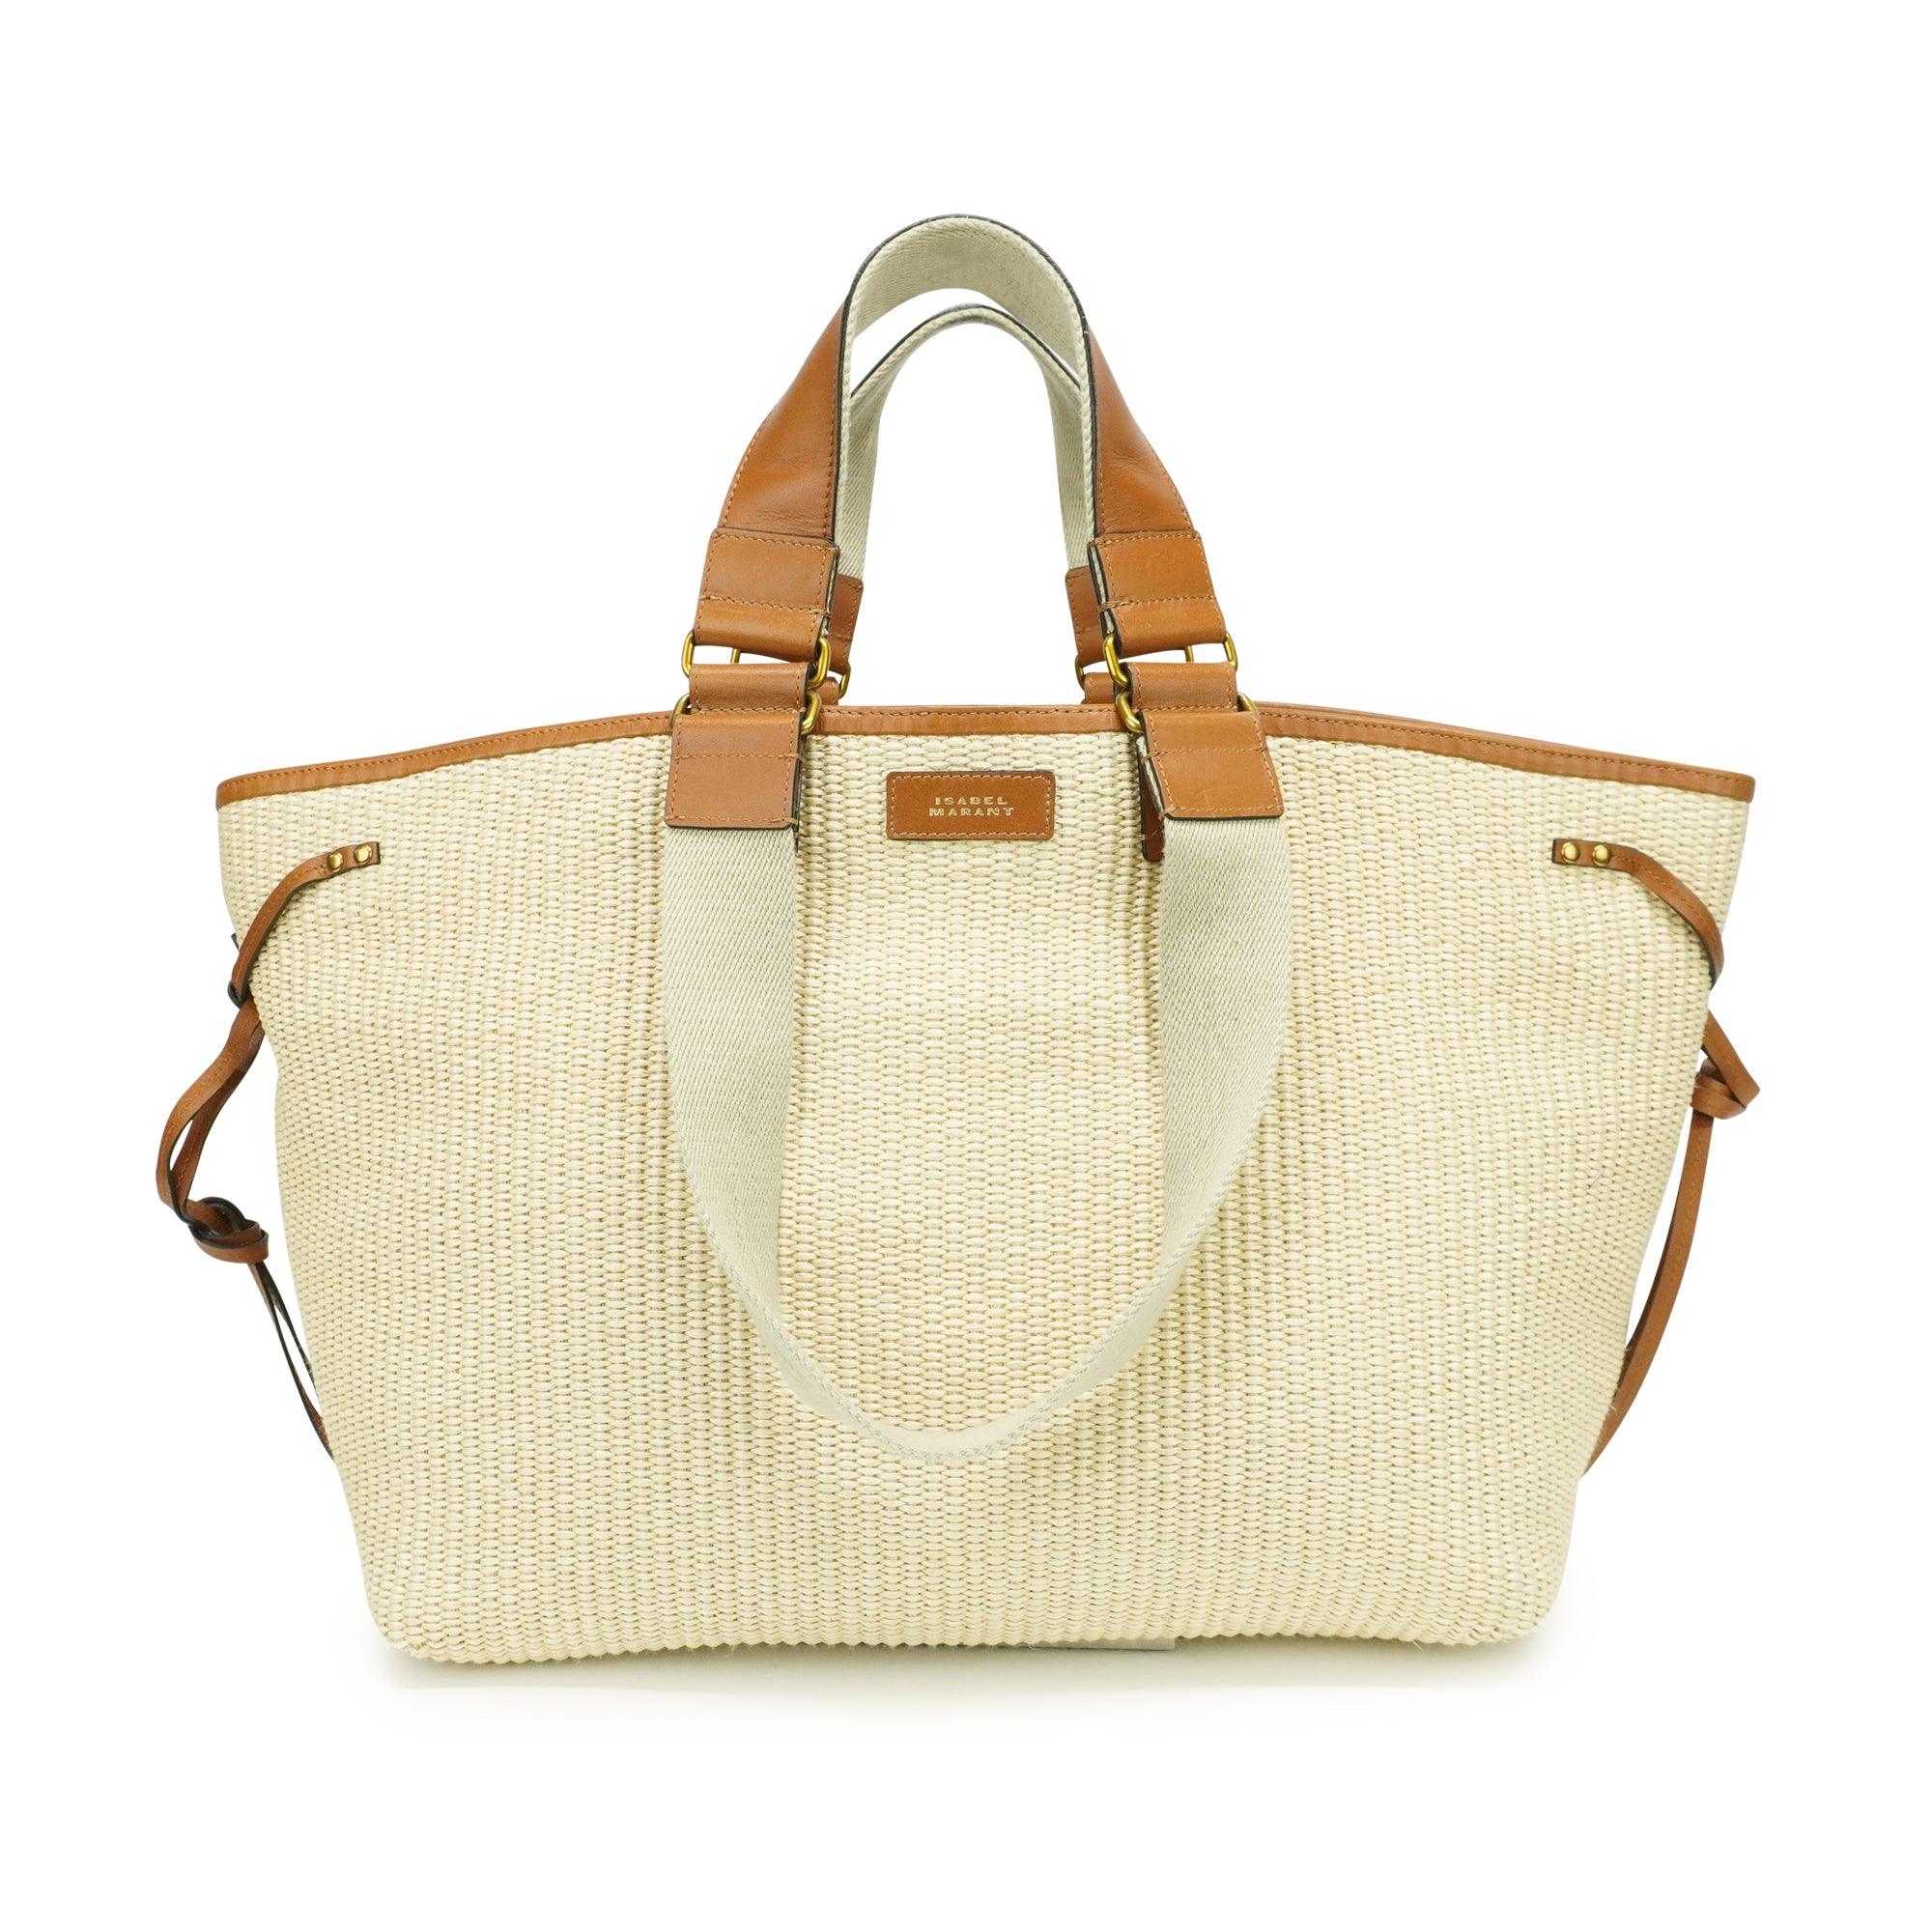 Isabel Marant Tote Bag - Fashionably Yours